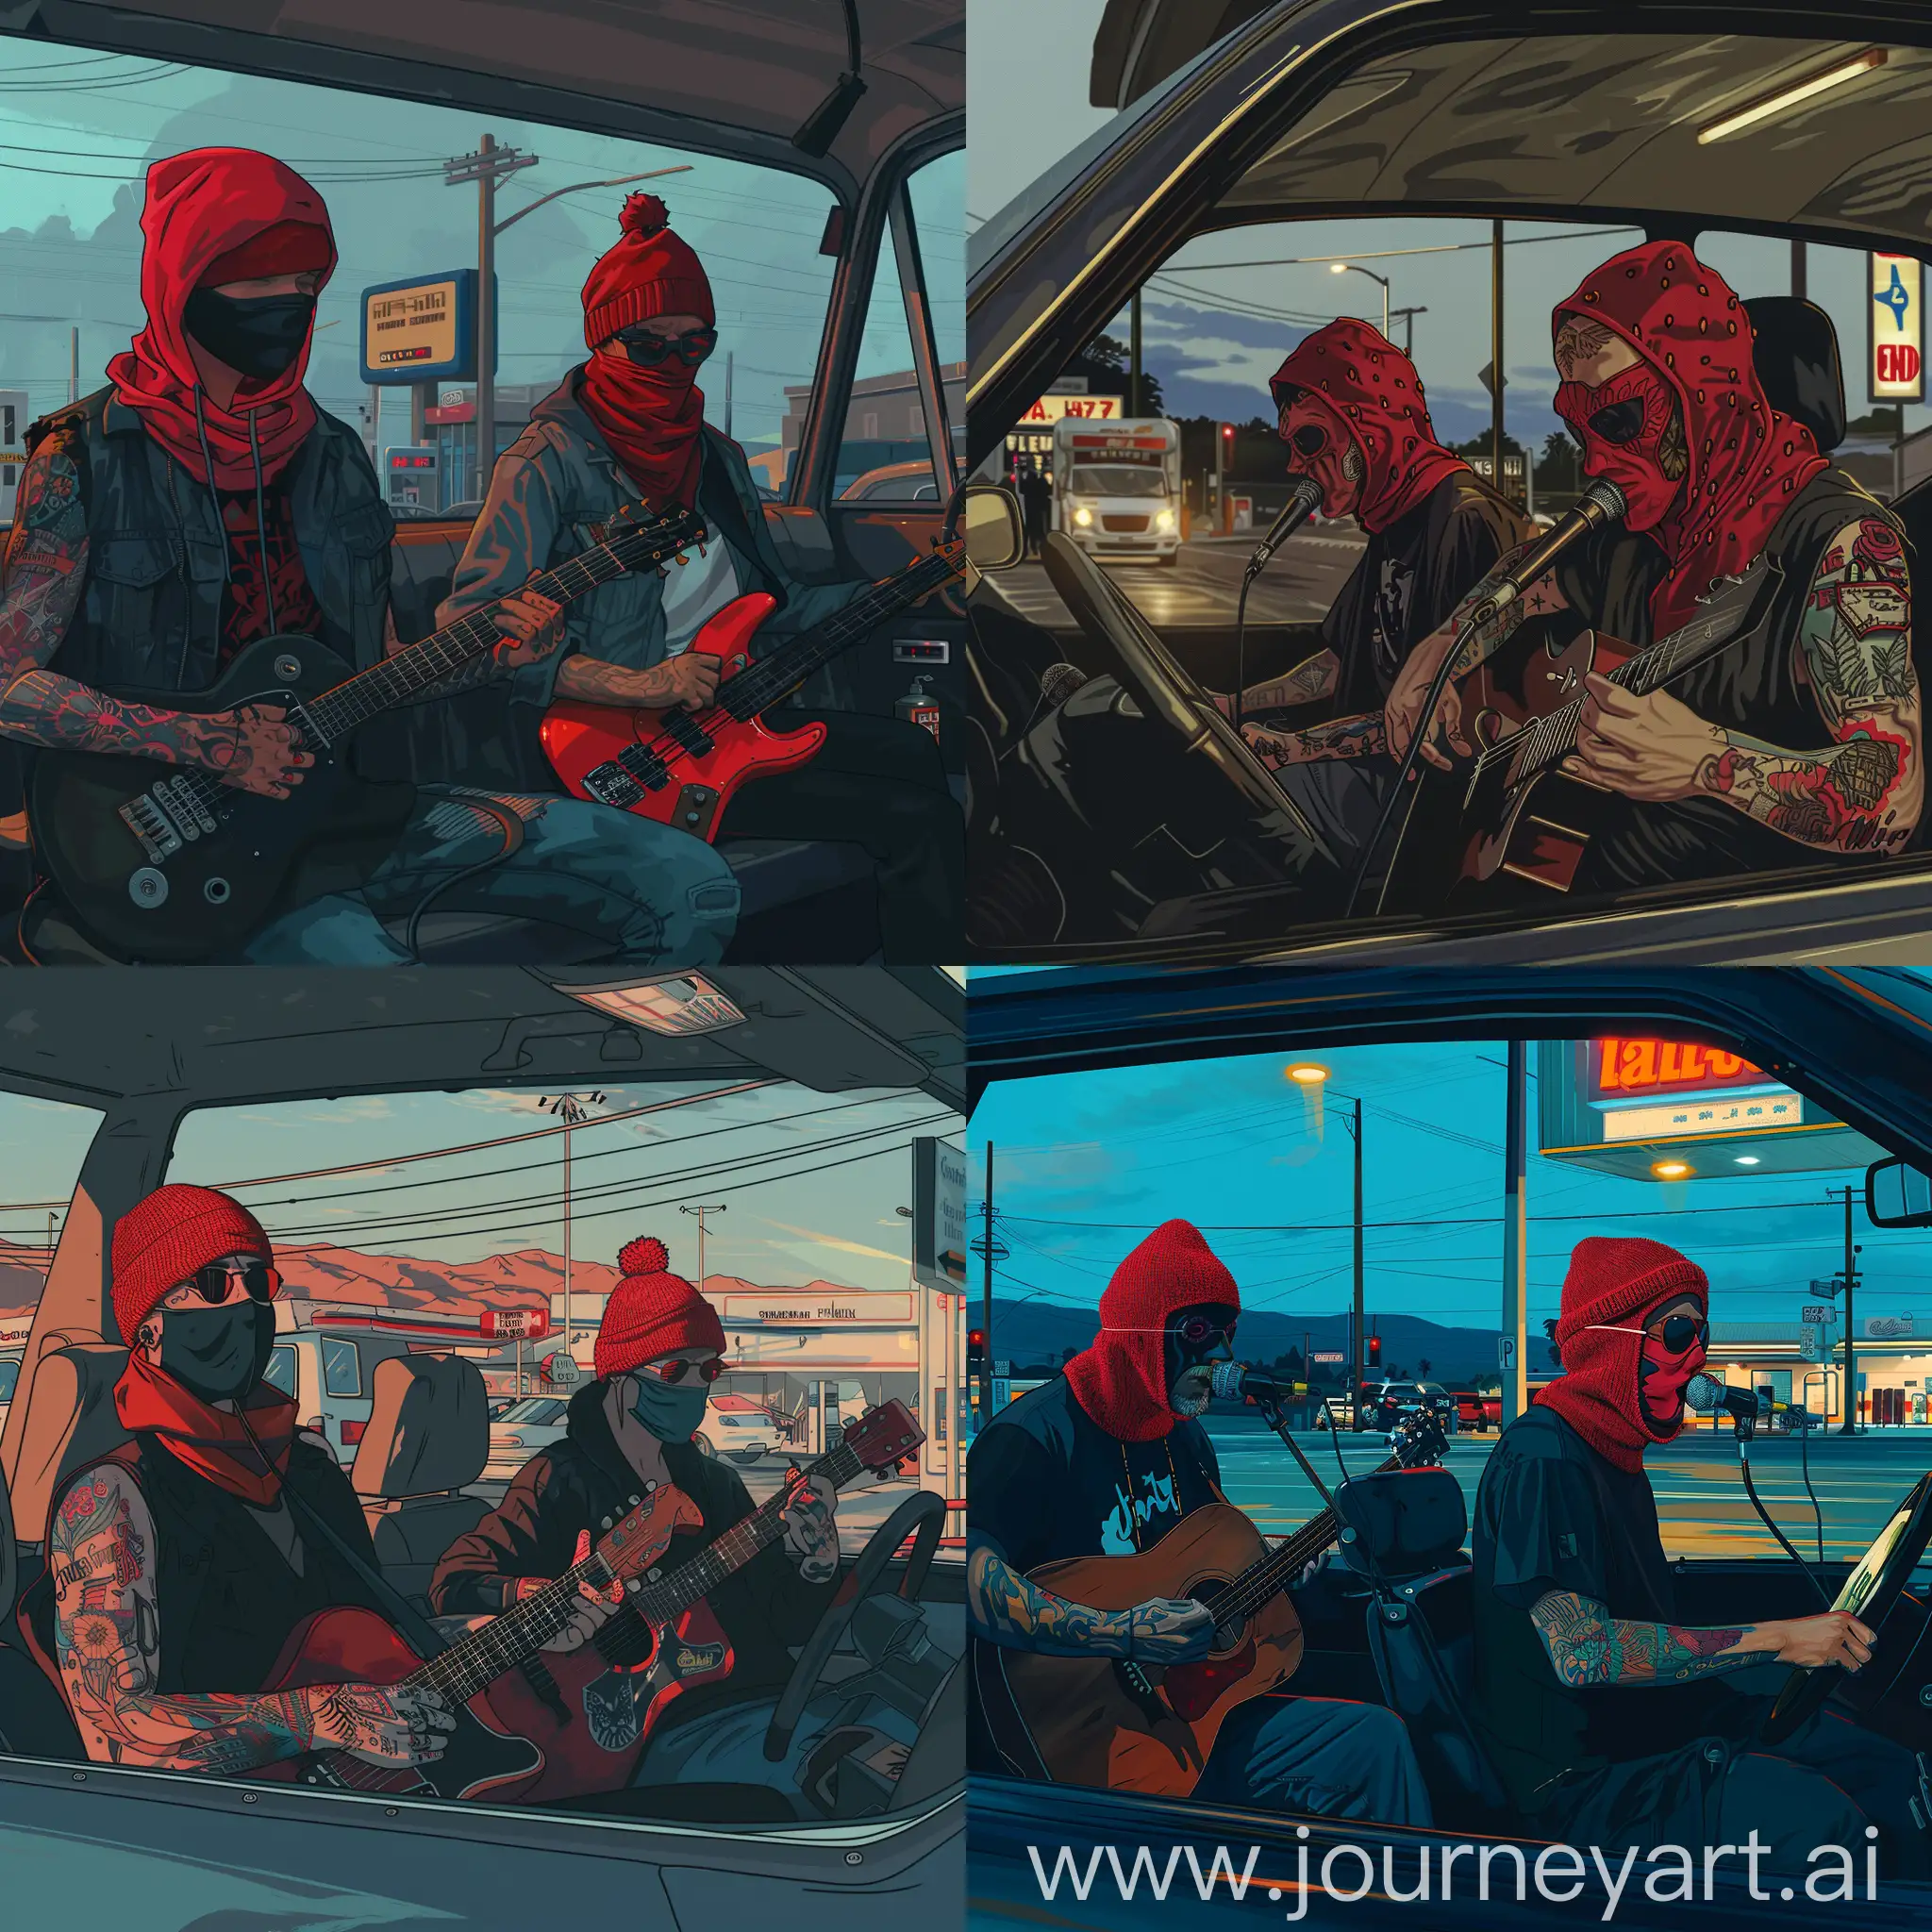 Two-Men-Making-Music-with-Red-Woolen-Masks-at-Gas-Station